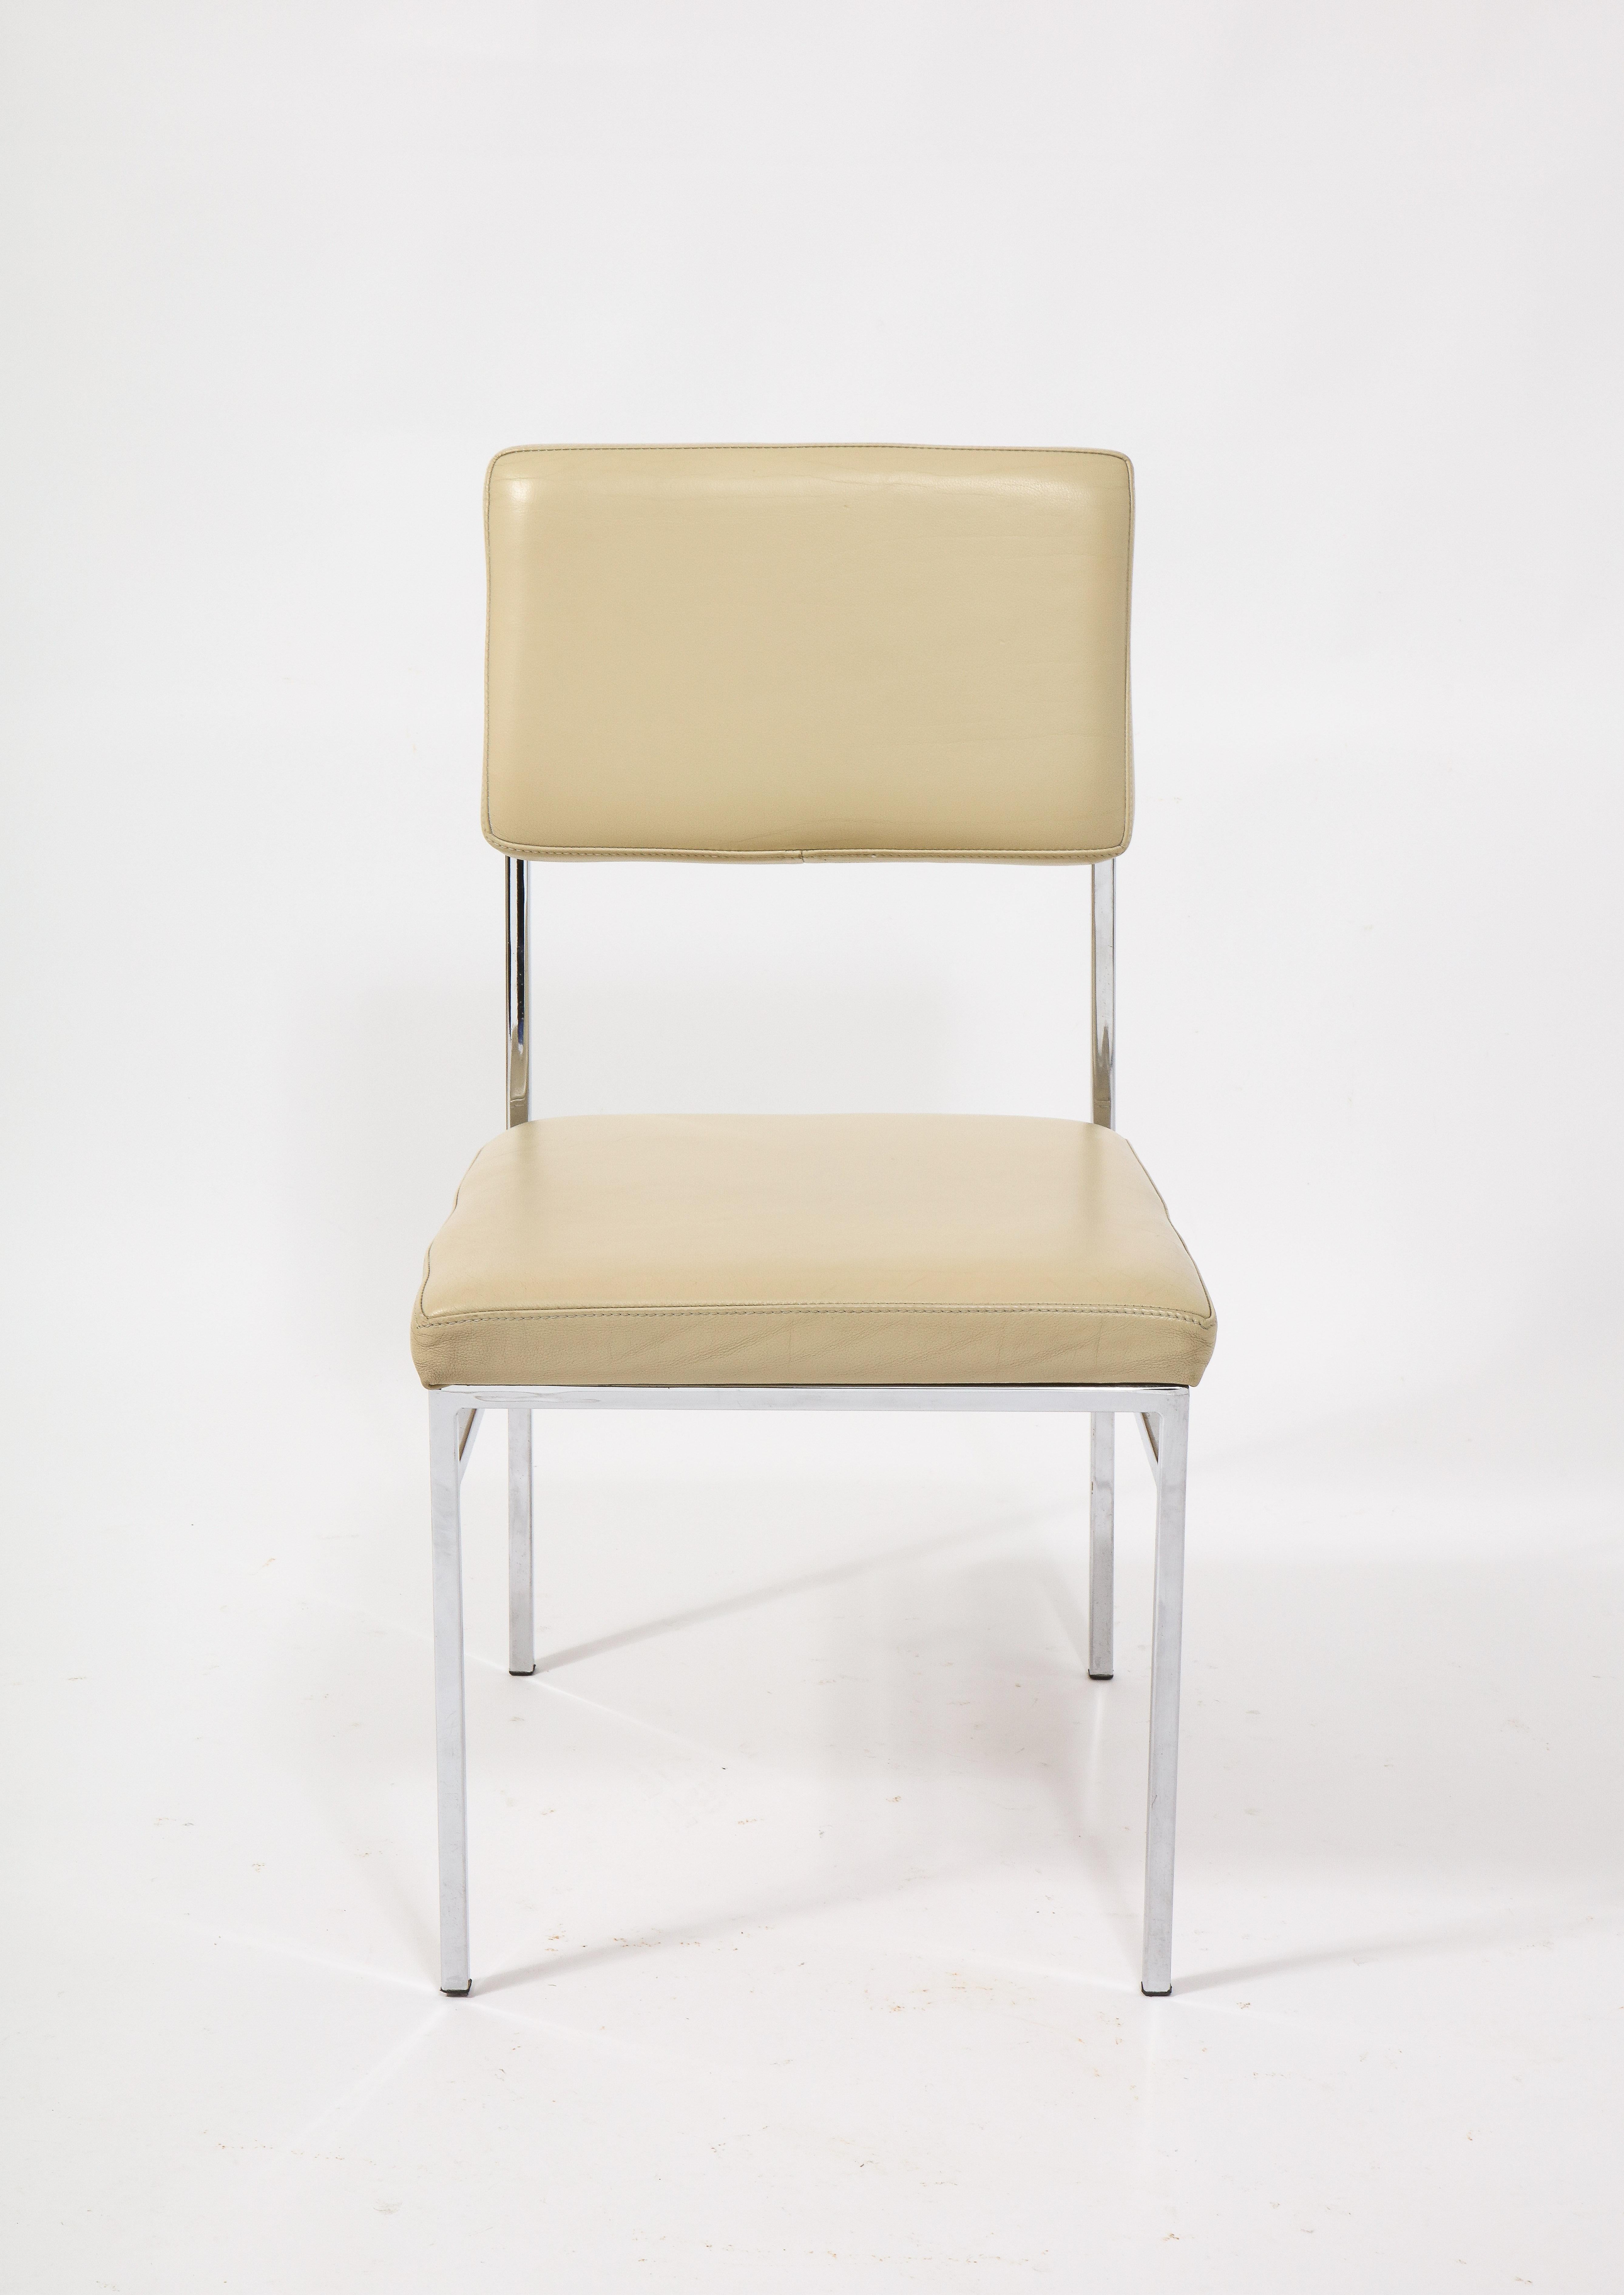 6 Chrome and Cream Leather P60 Chairs by Philippon & Lecoq, France, 1960's In Fair Condition For Sale In New York, NY